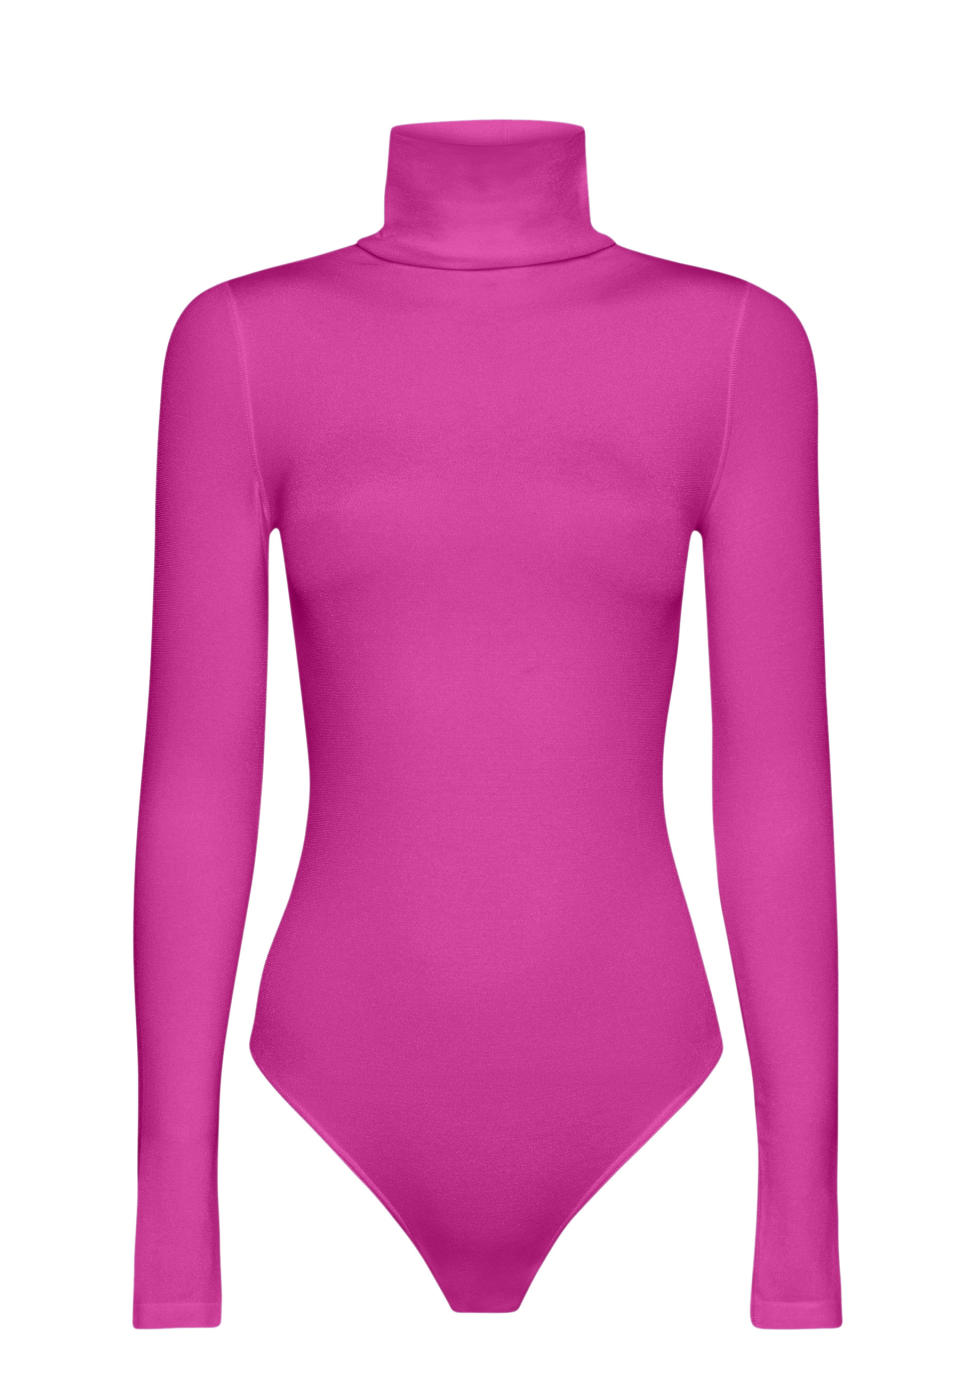 Wolford’s Colorado Body in pink.